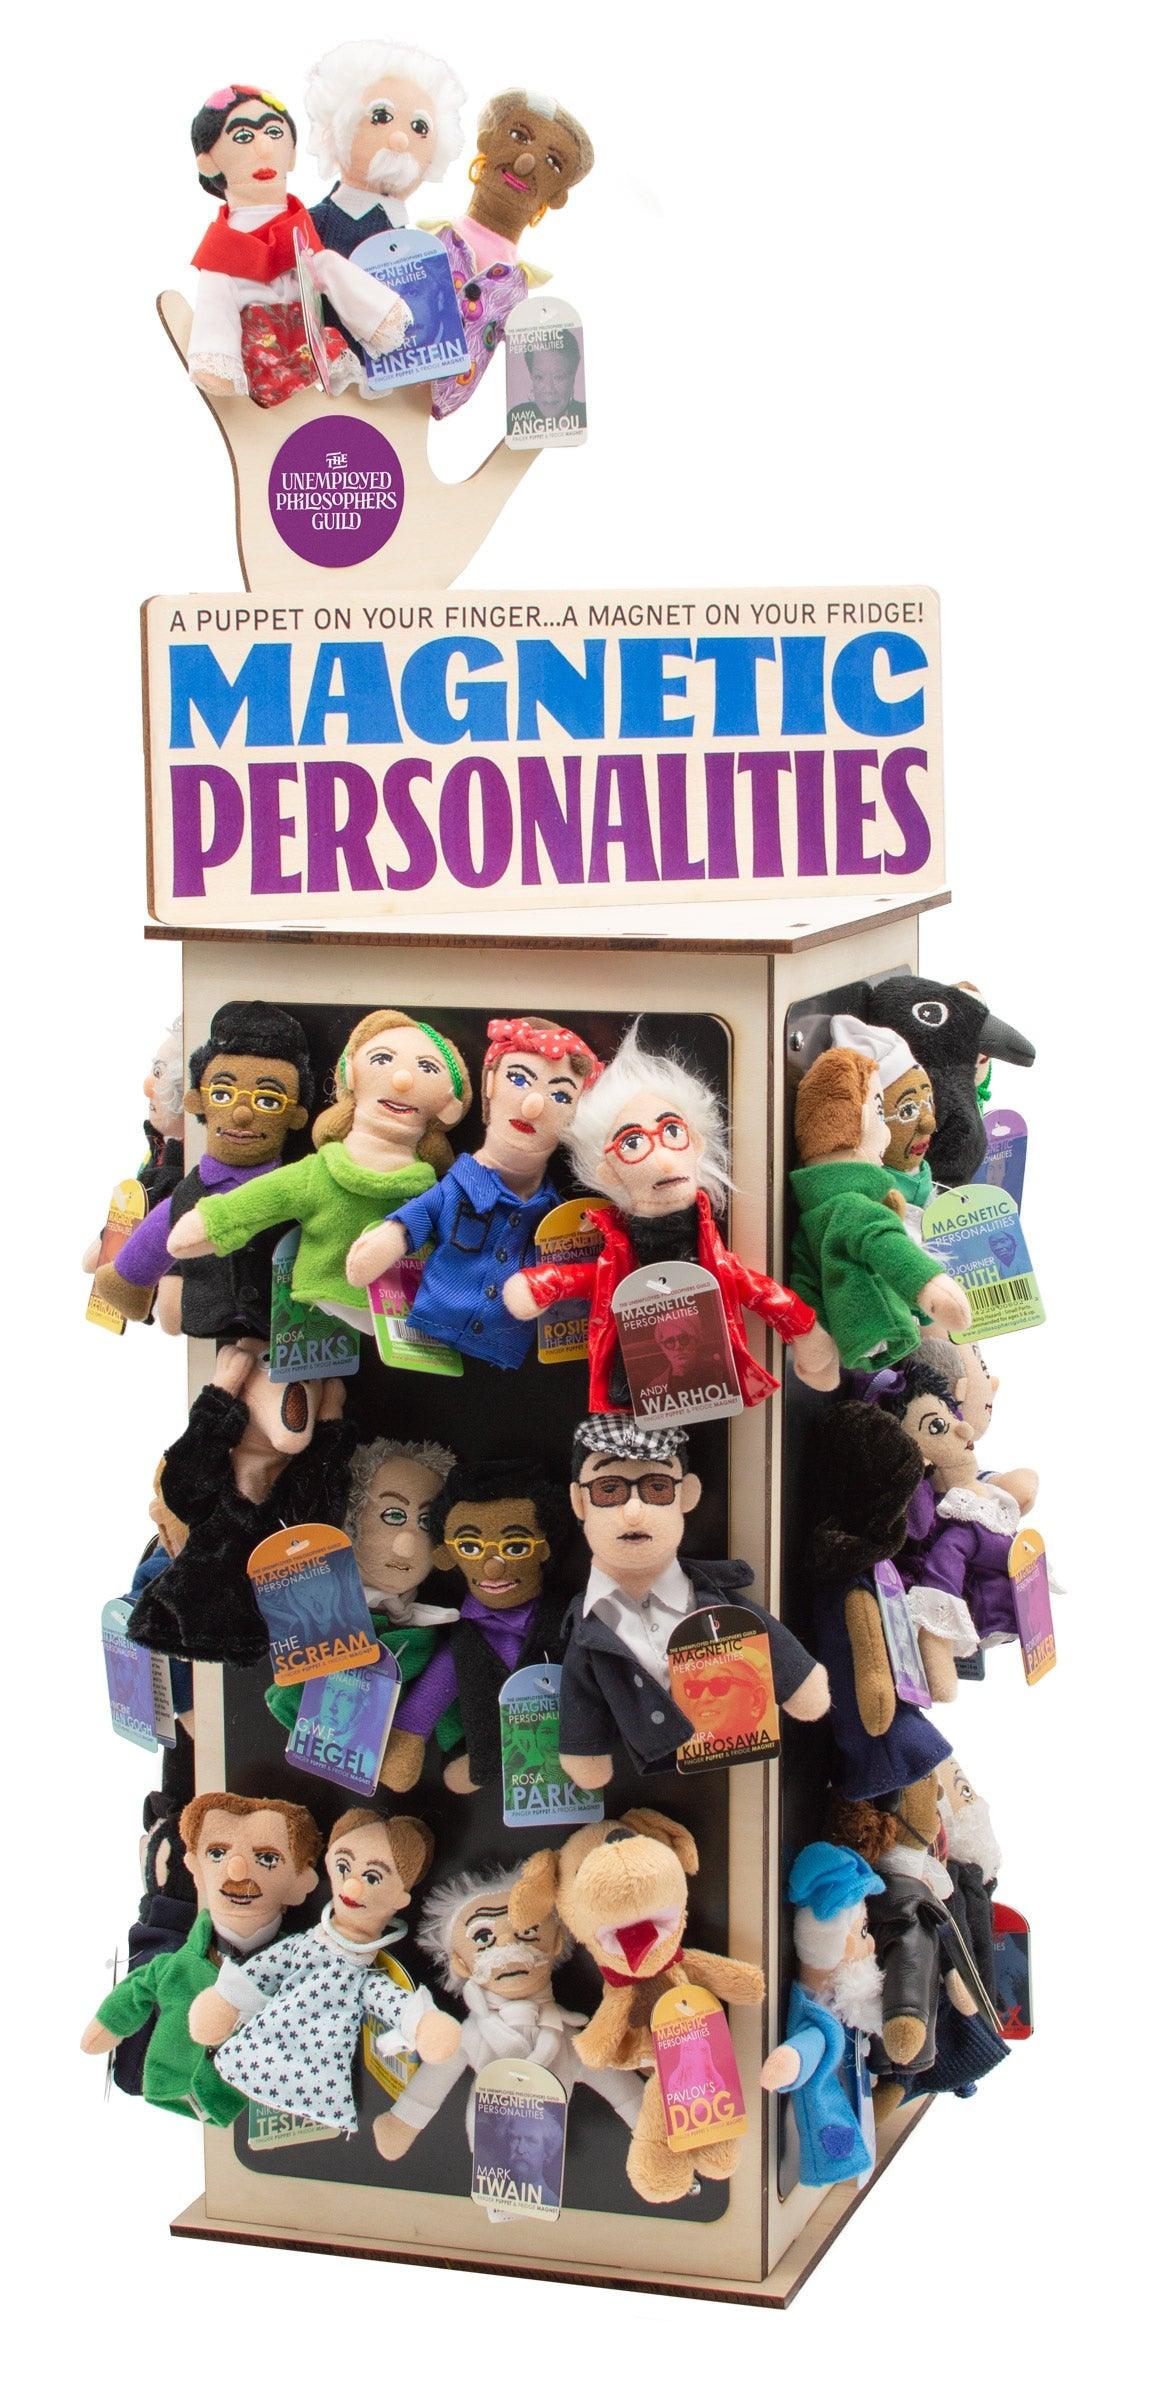 Product photo of Small Magnetic Personality Spinner, a novelty gift manufactured by The Unemployed Philosophers Guild.